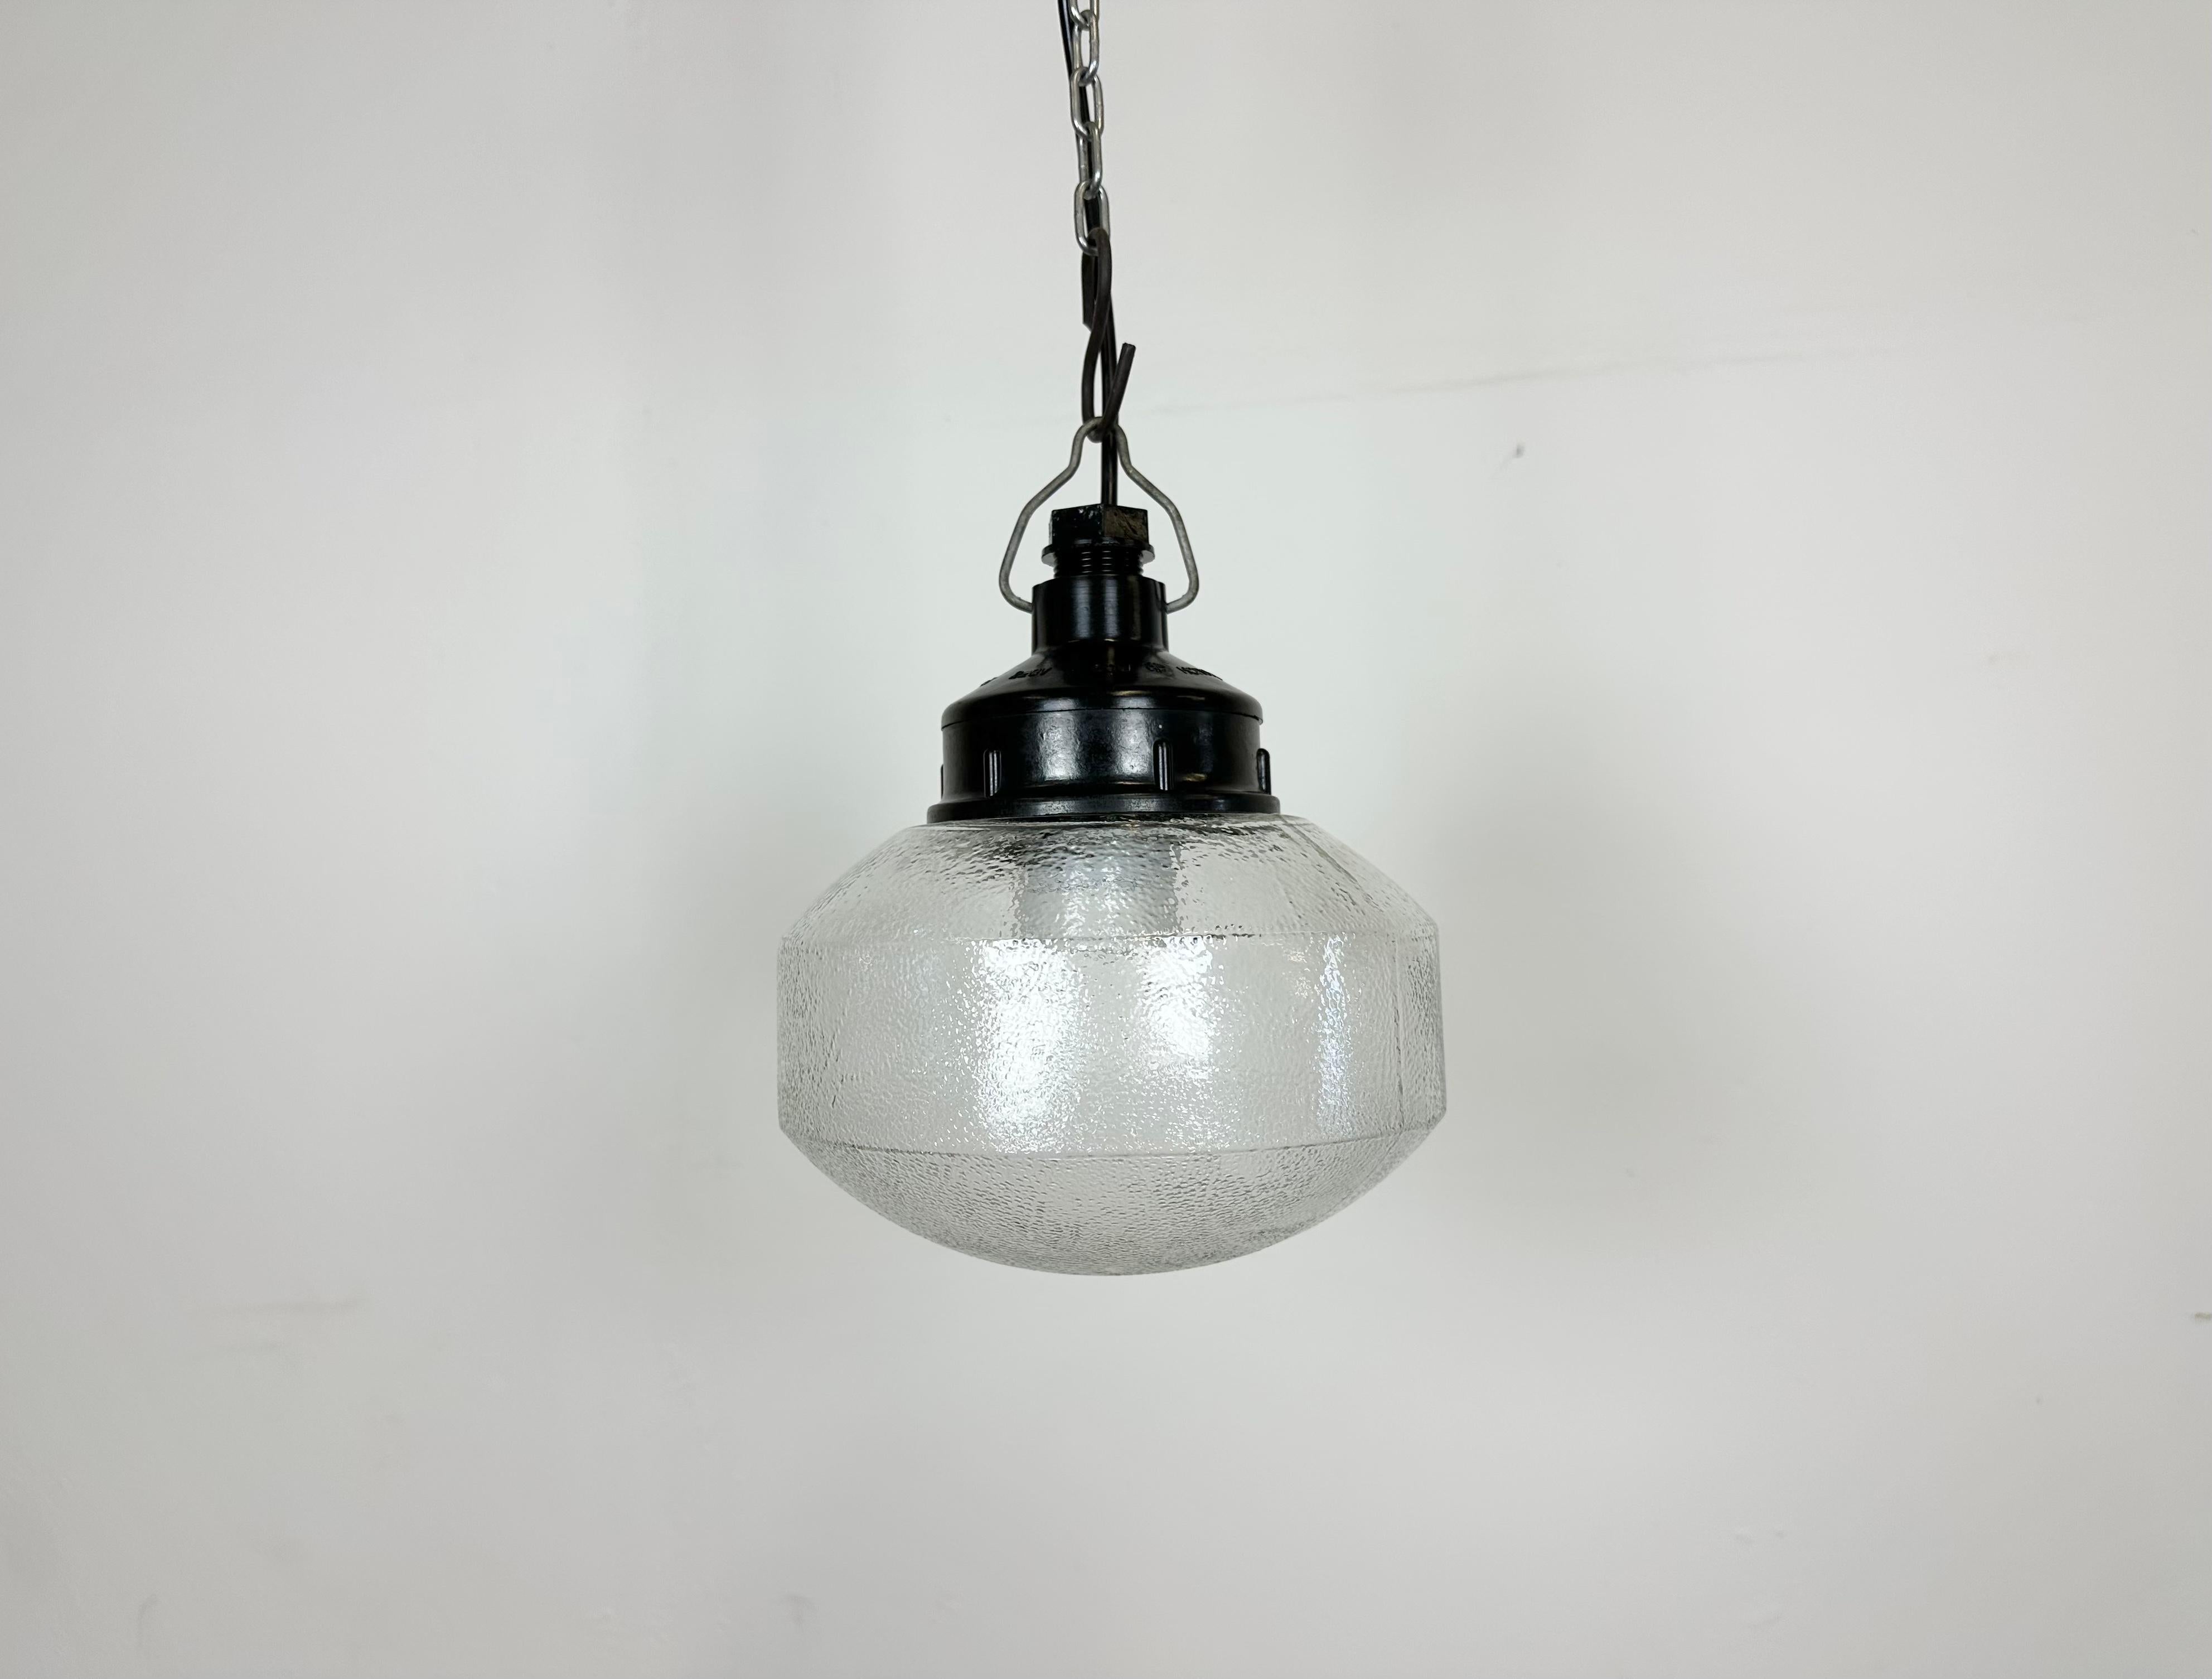 Vintage Industrial light made in former Soviet Union during the 1970s. It features a brown bakelite top and a frosted glass cover. The socket requires E27/ E26 light bulbs. New wire. The weight of the lamp is 1 kg.